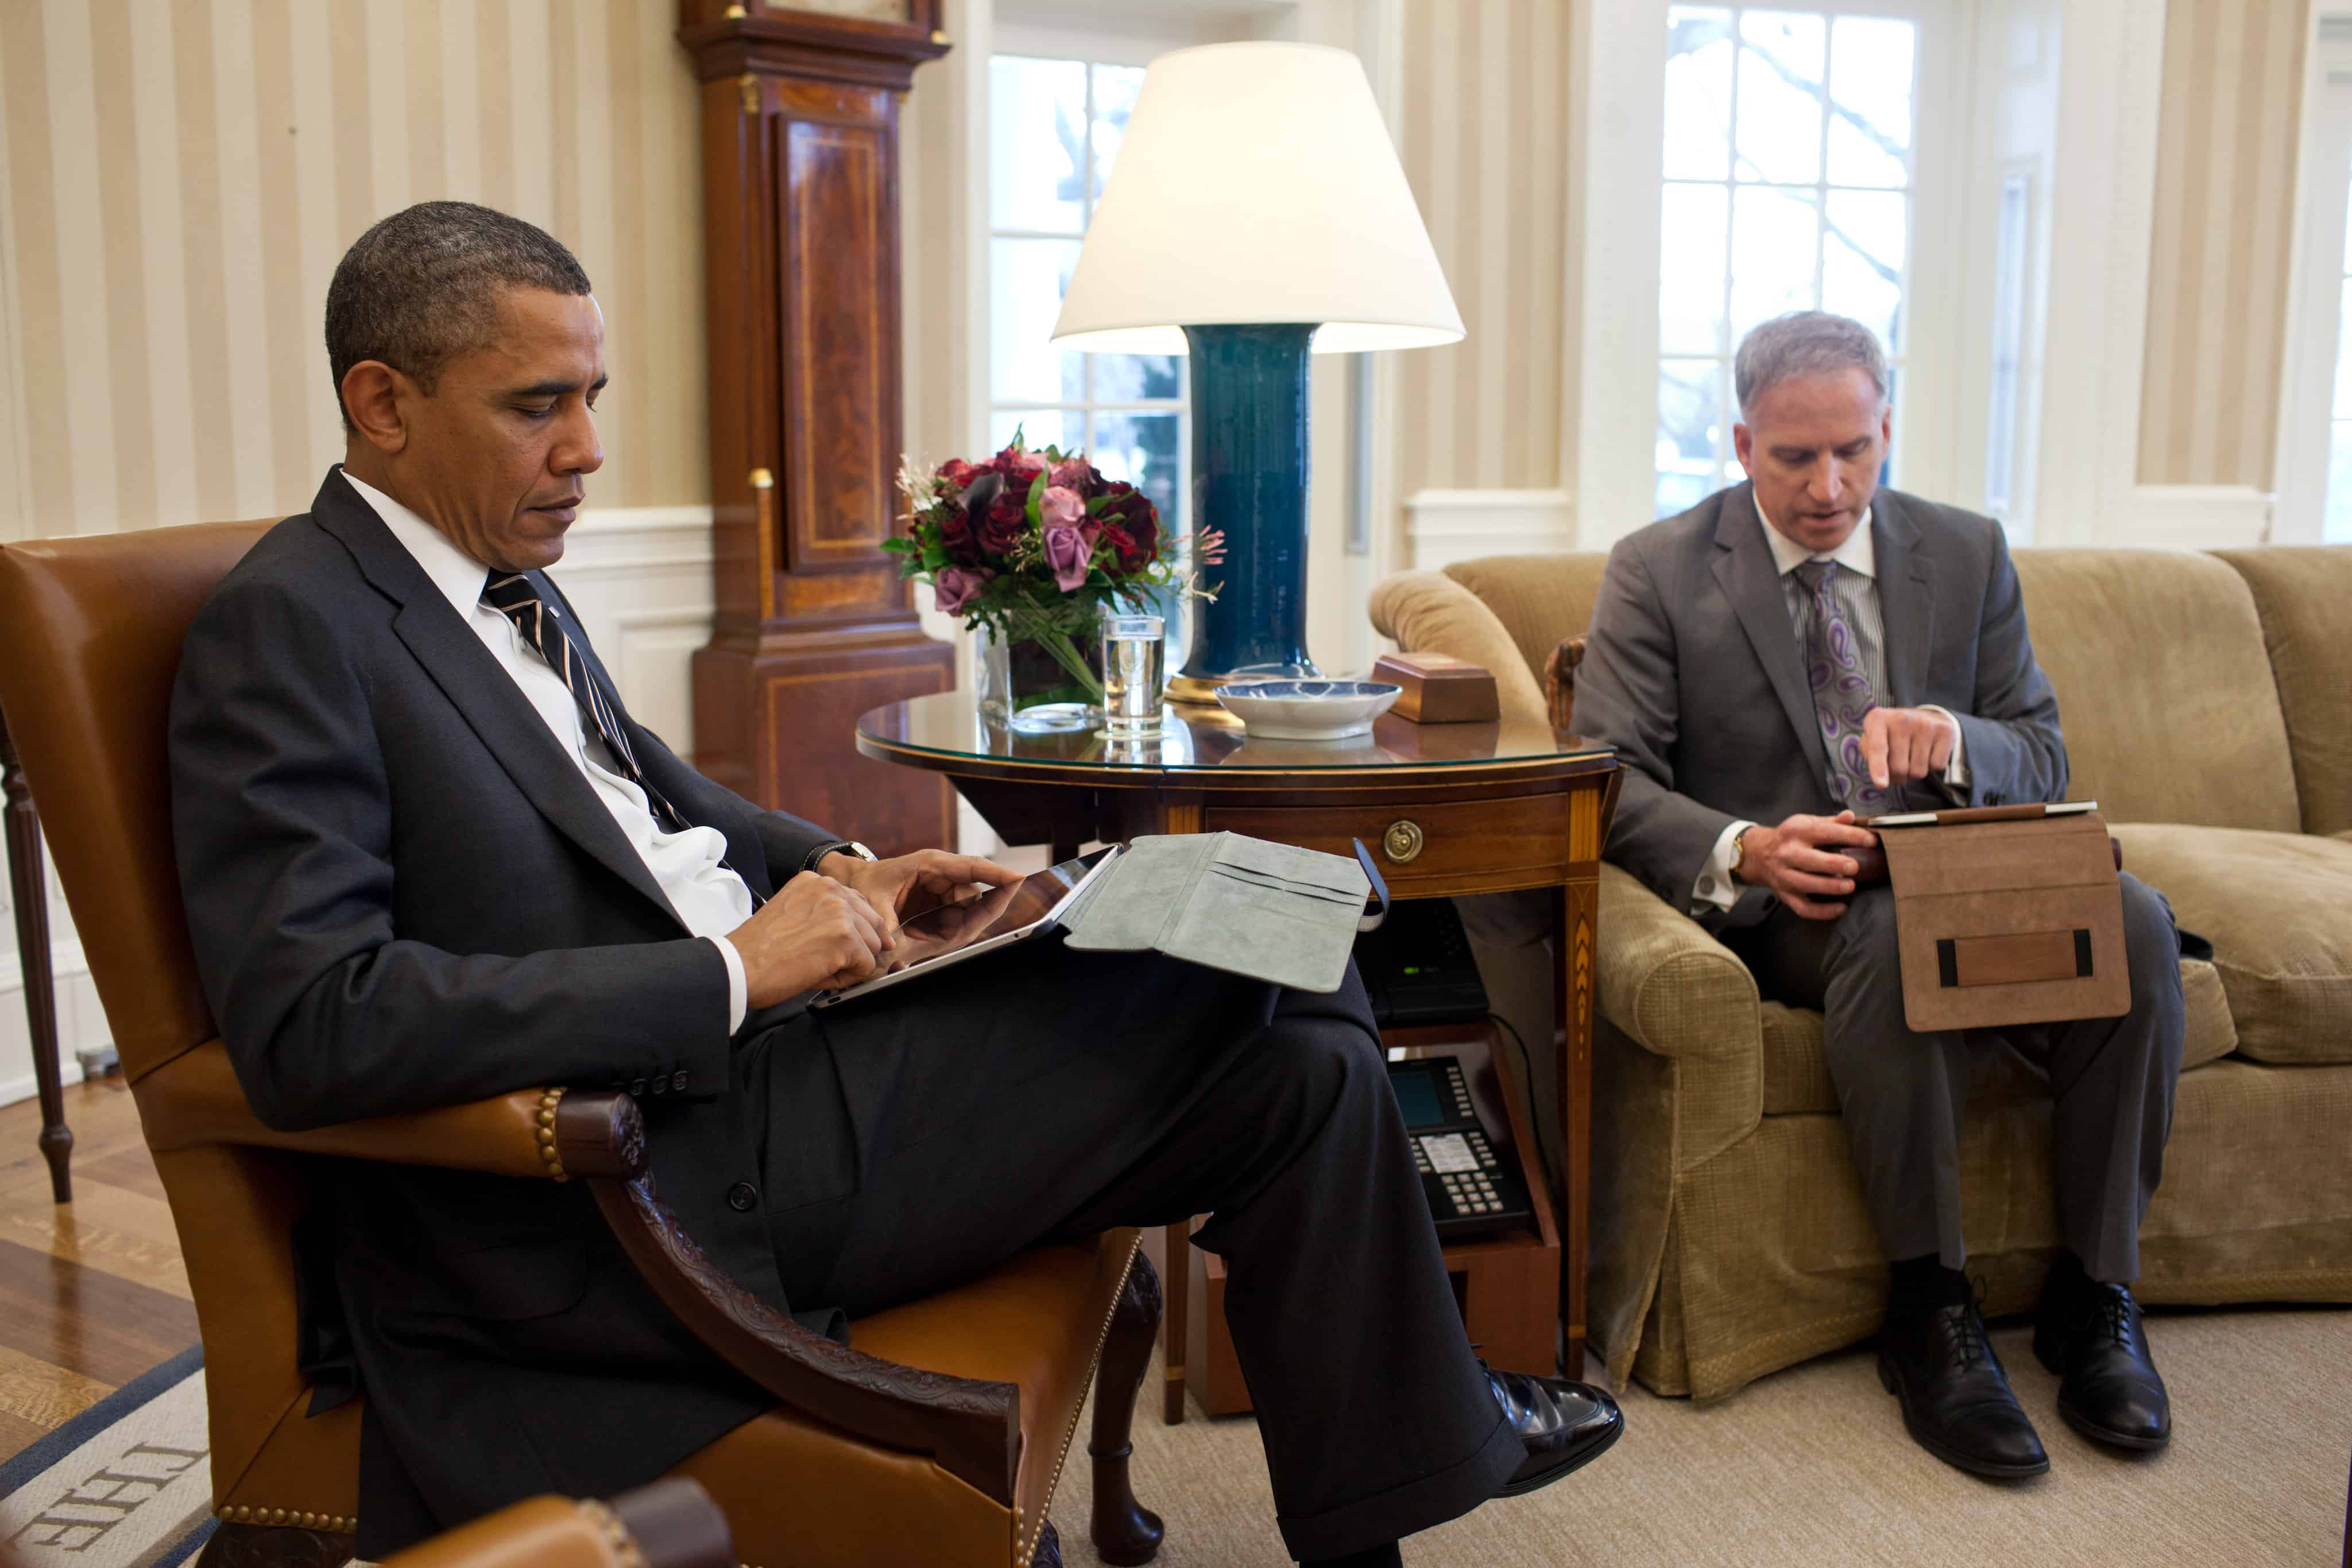 Obama receives briefing on an iPad